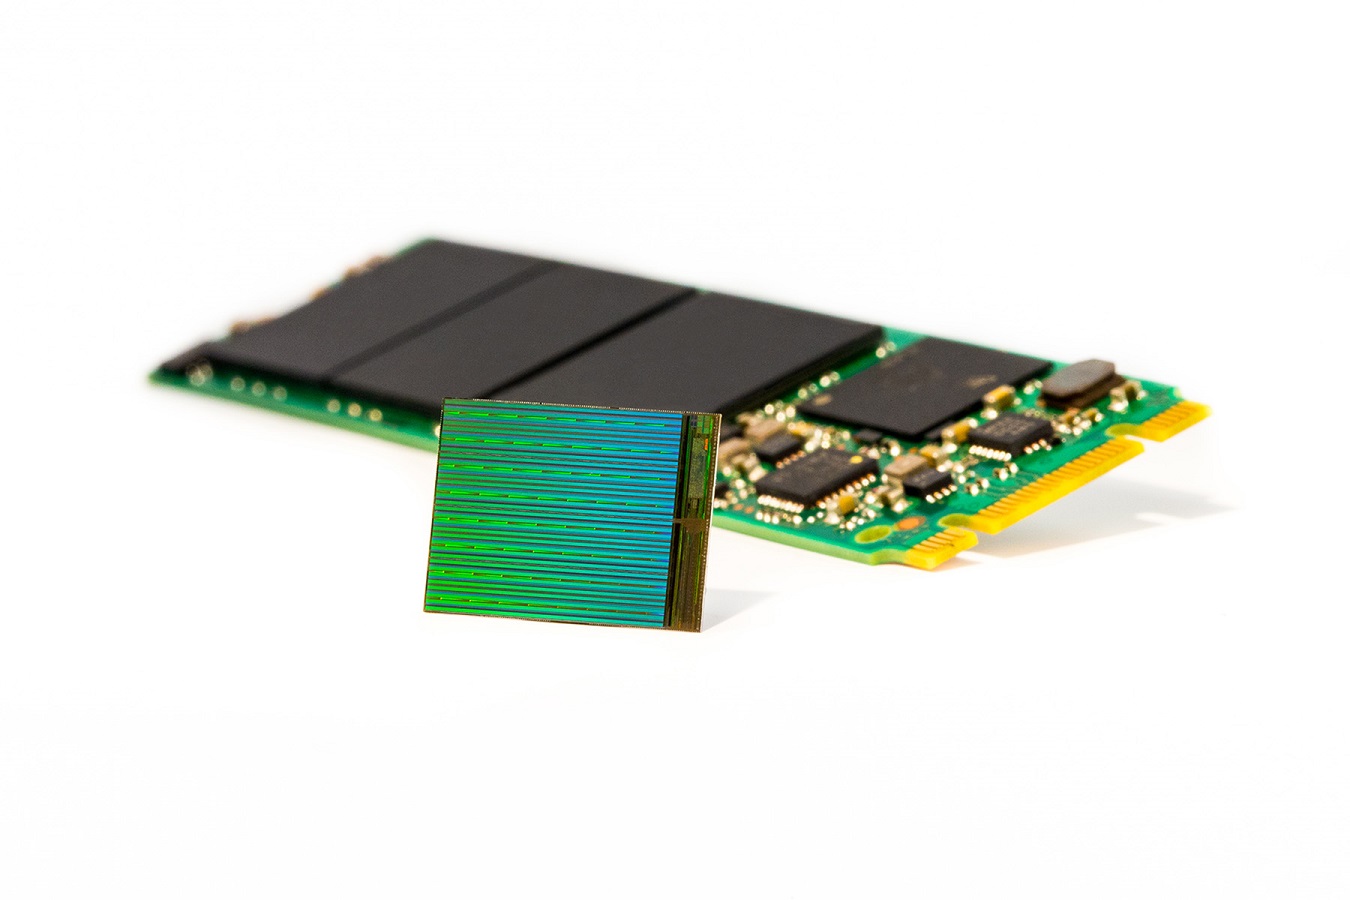 NAND Flash Prices Continue to Rise as Demand Outpaces Supply